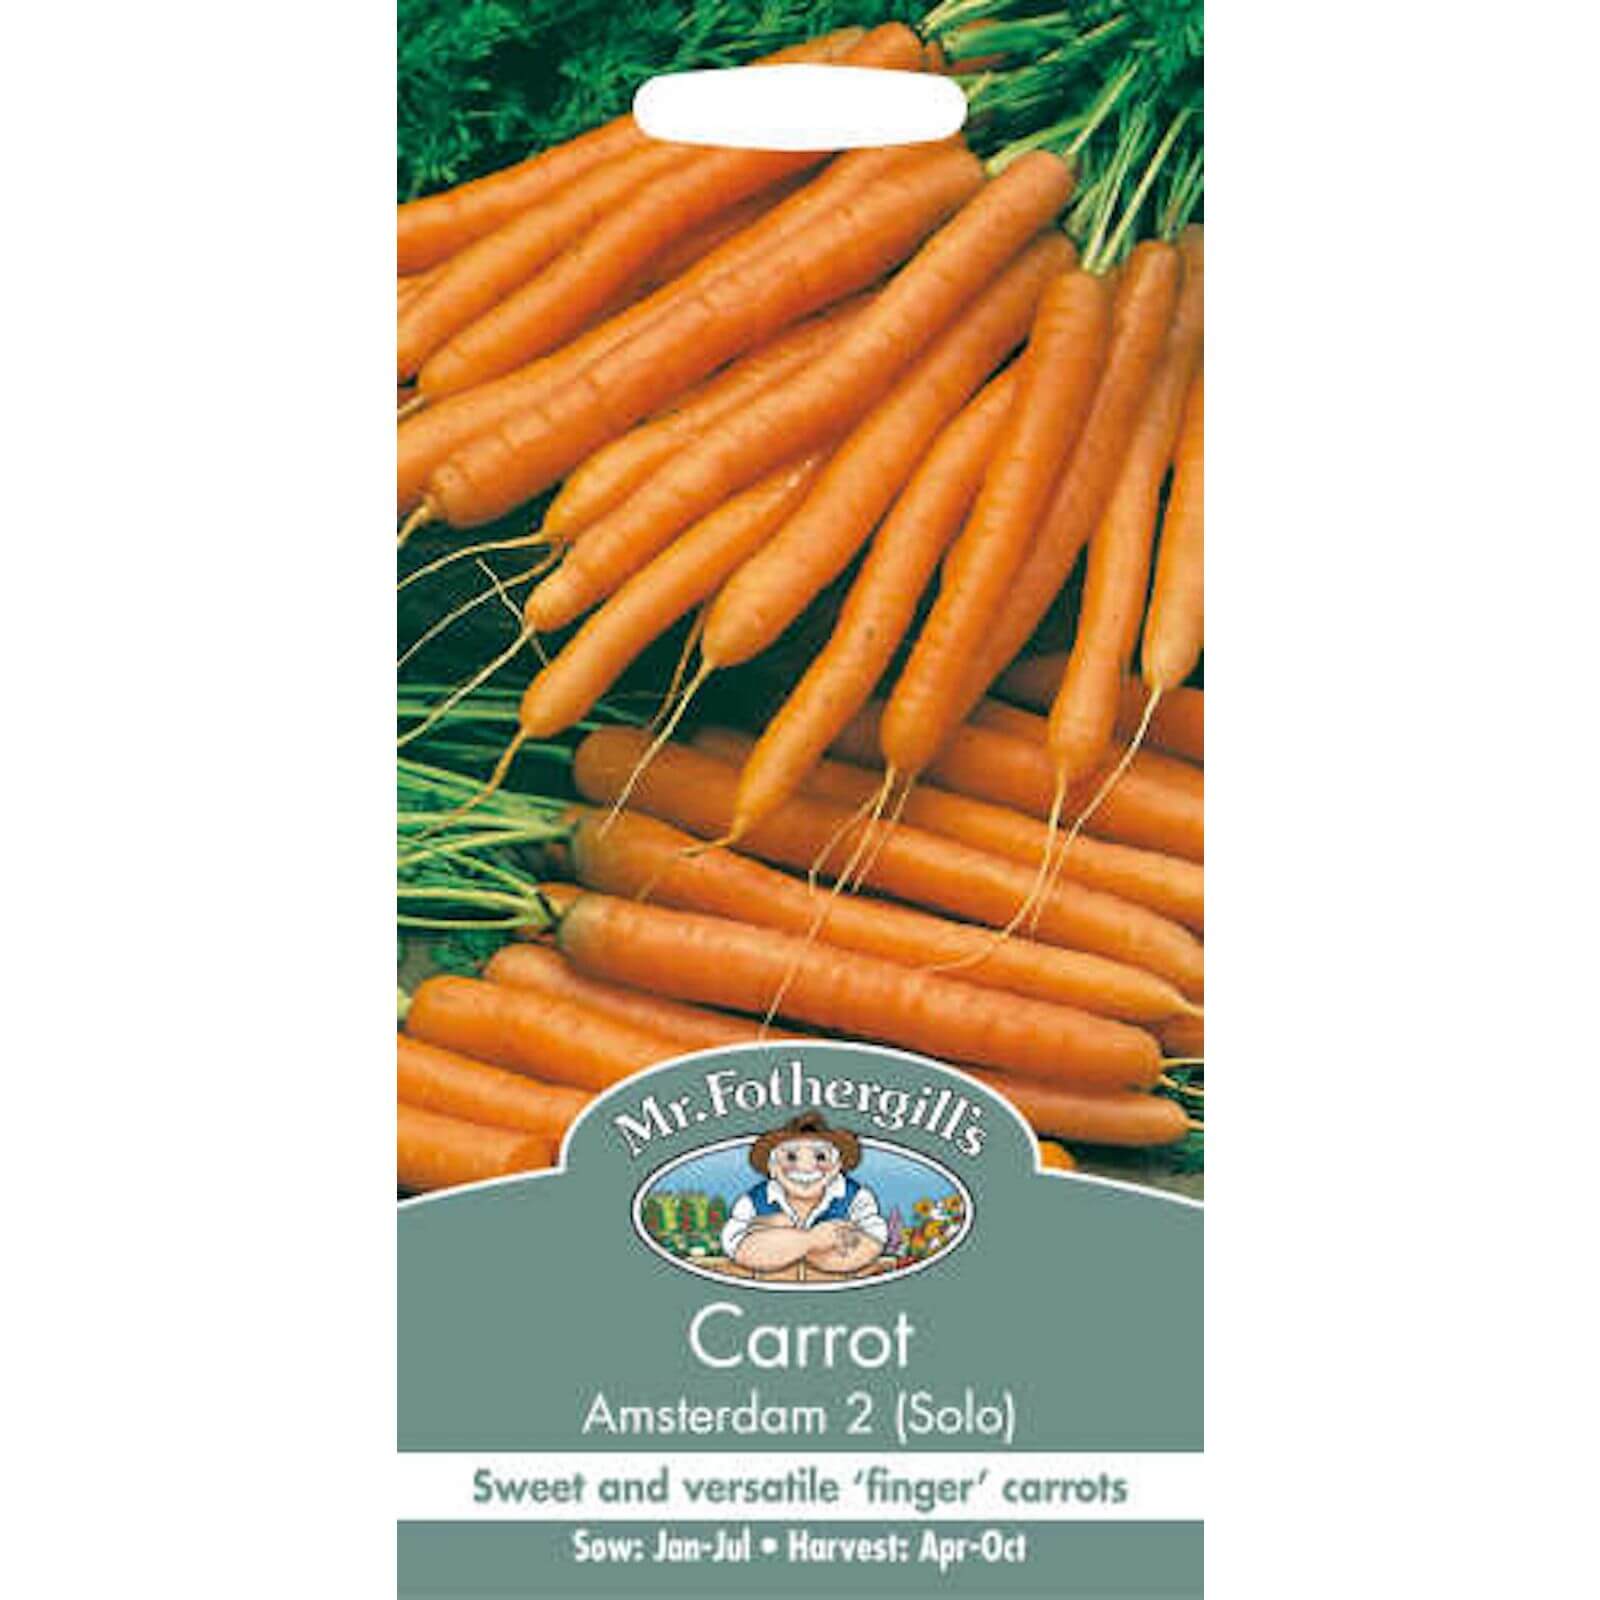 Mr. Fothergill's Carrot Amsterdam 2 Solo Seeds